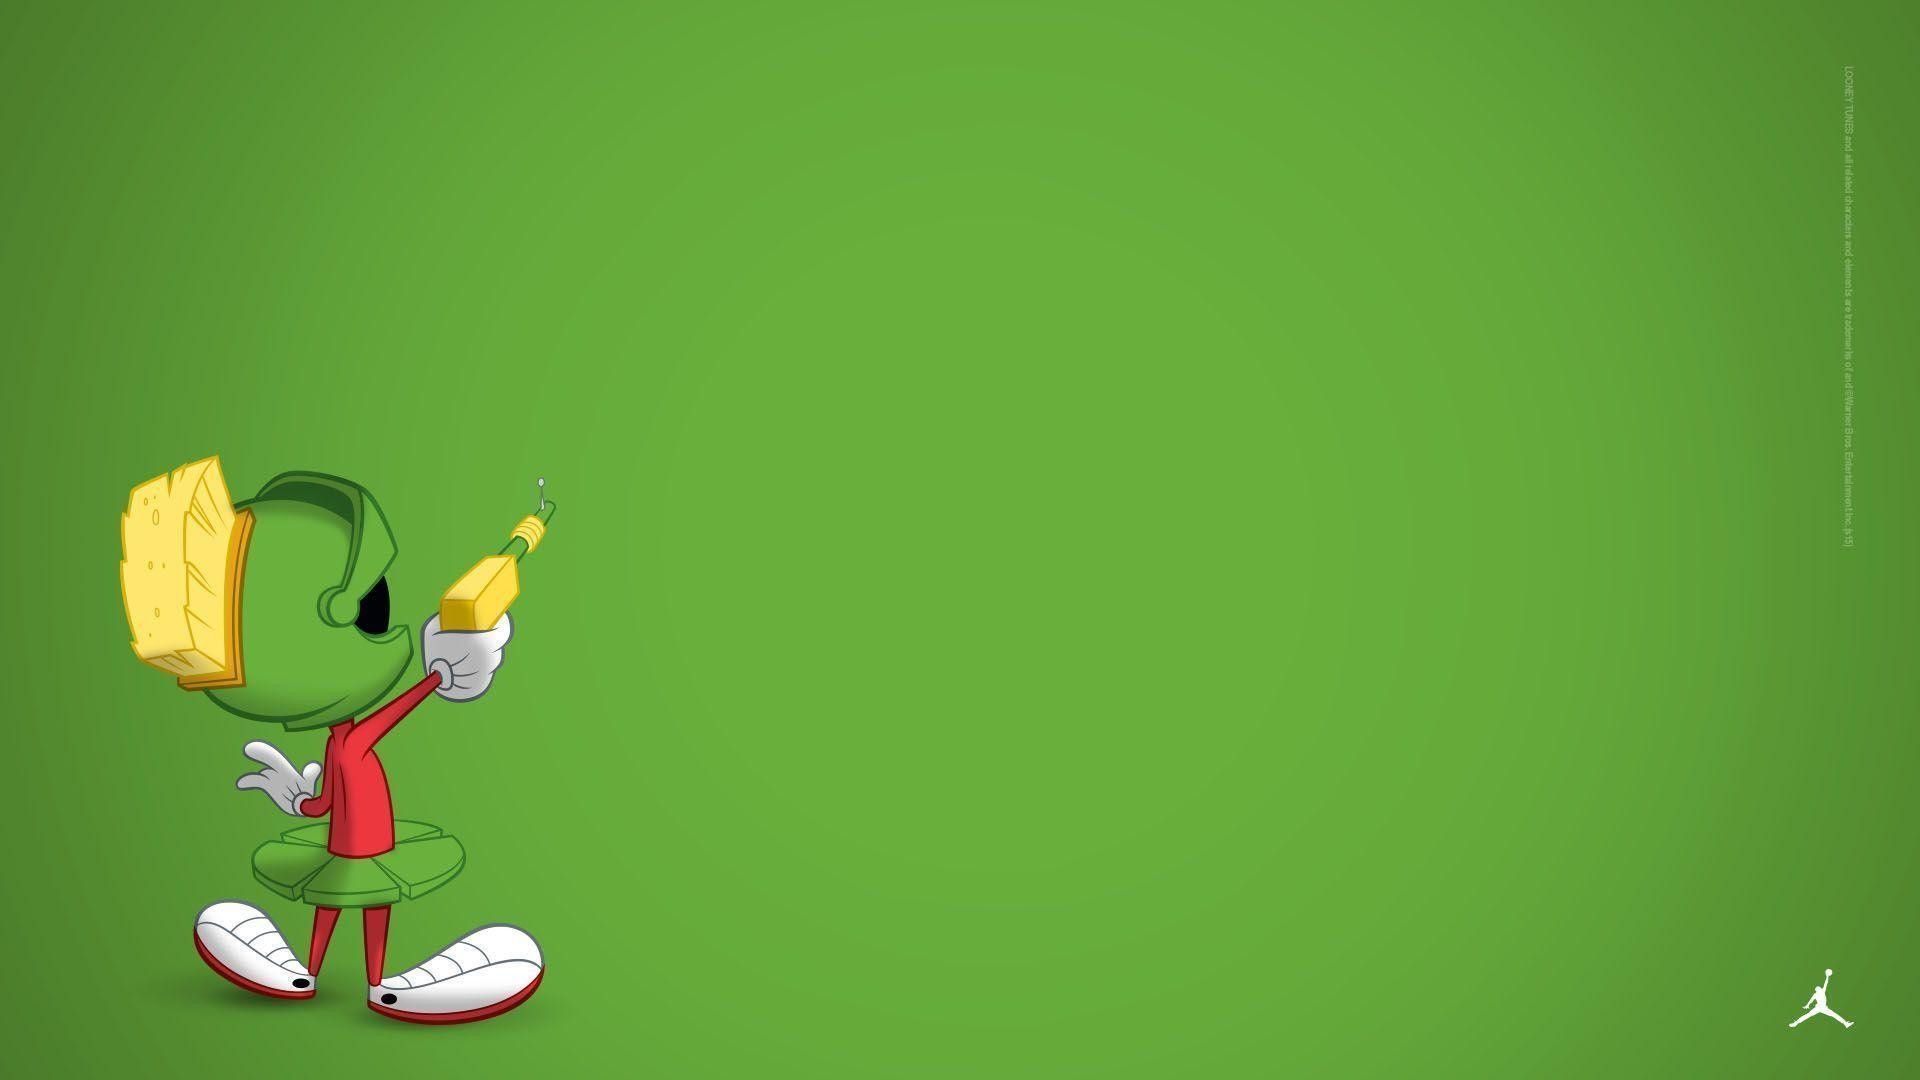 Marvin The Martian Wallpaper background picture